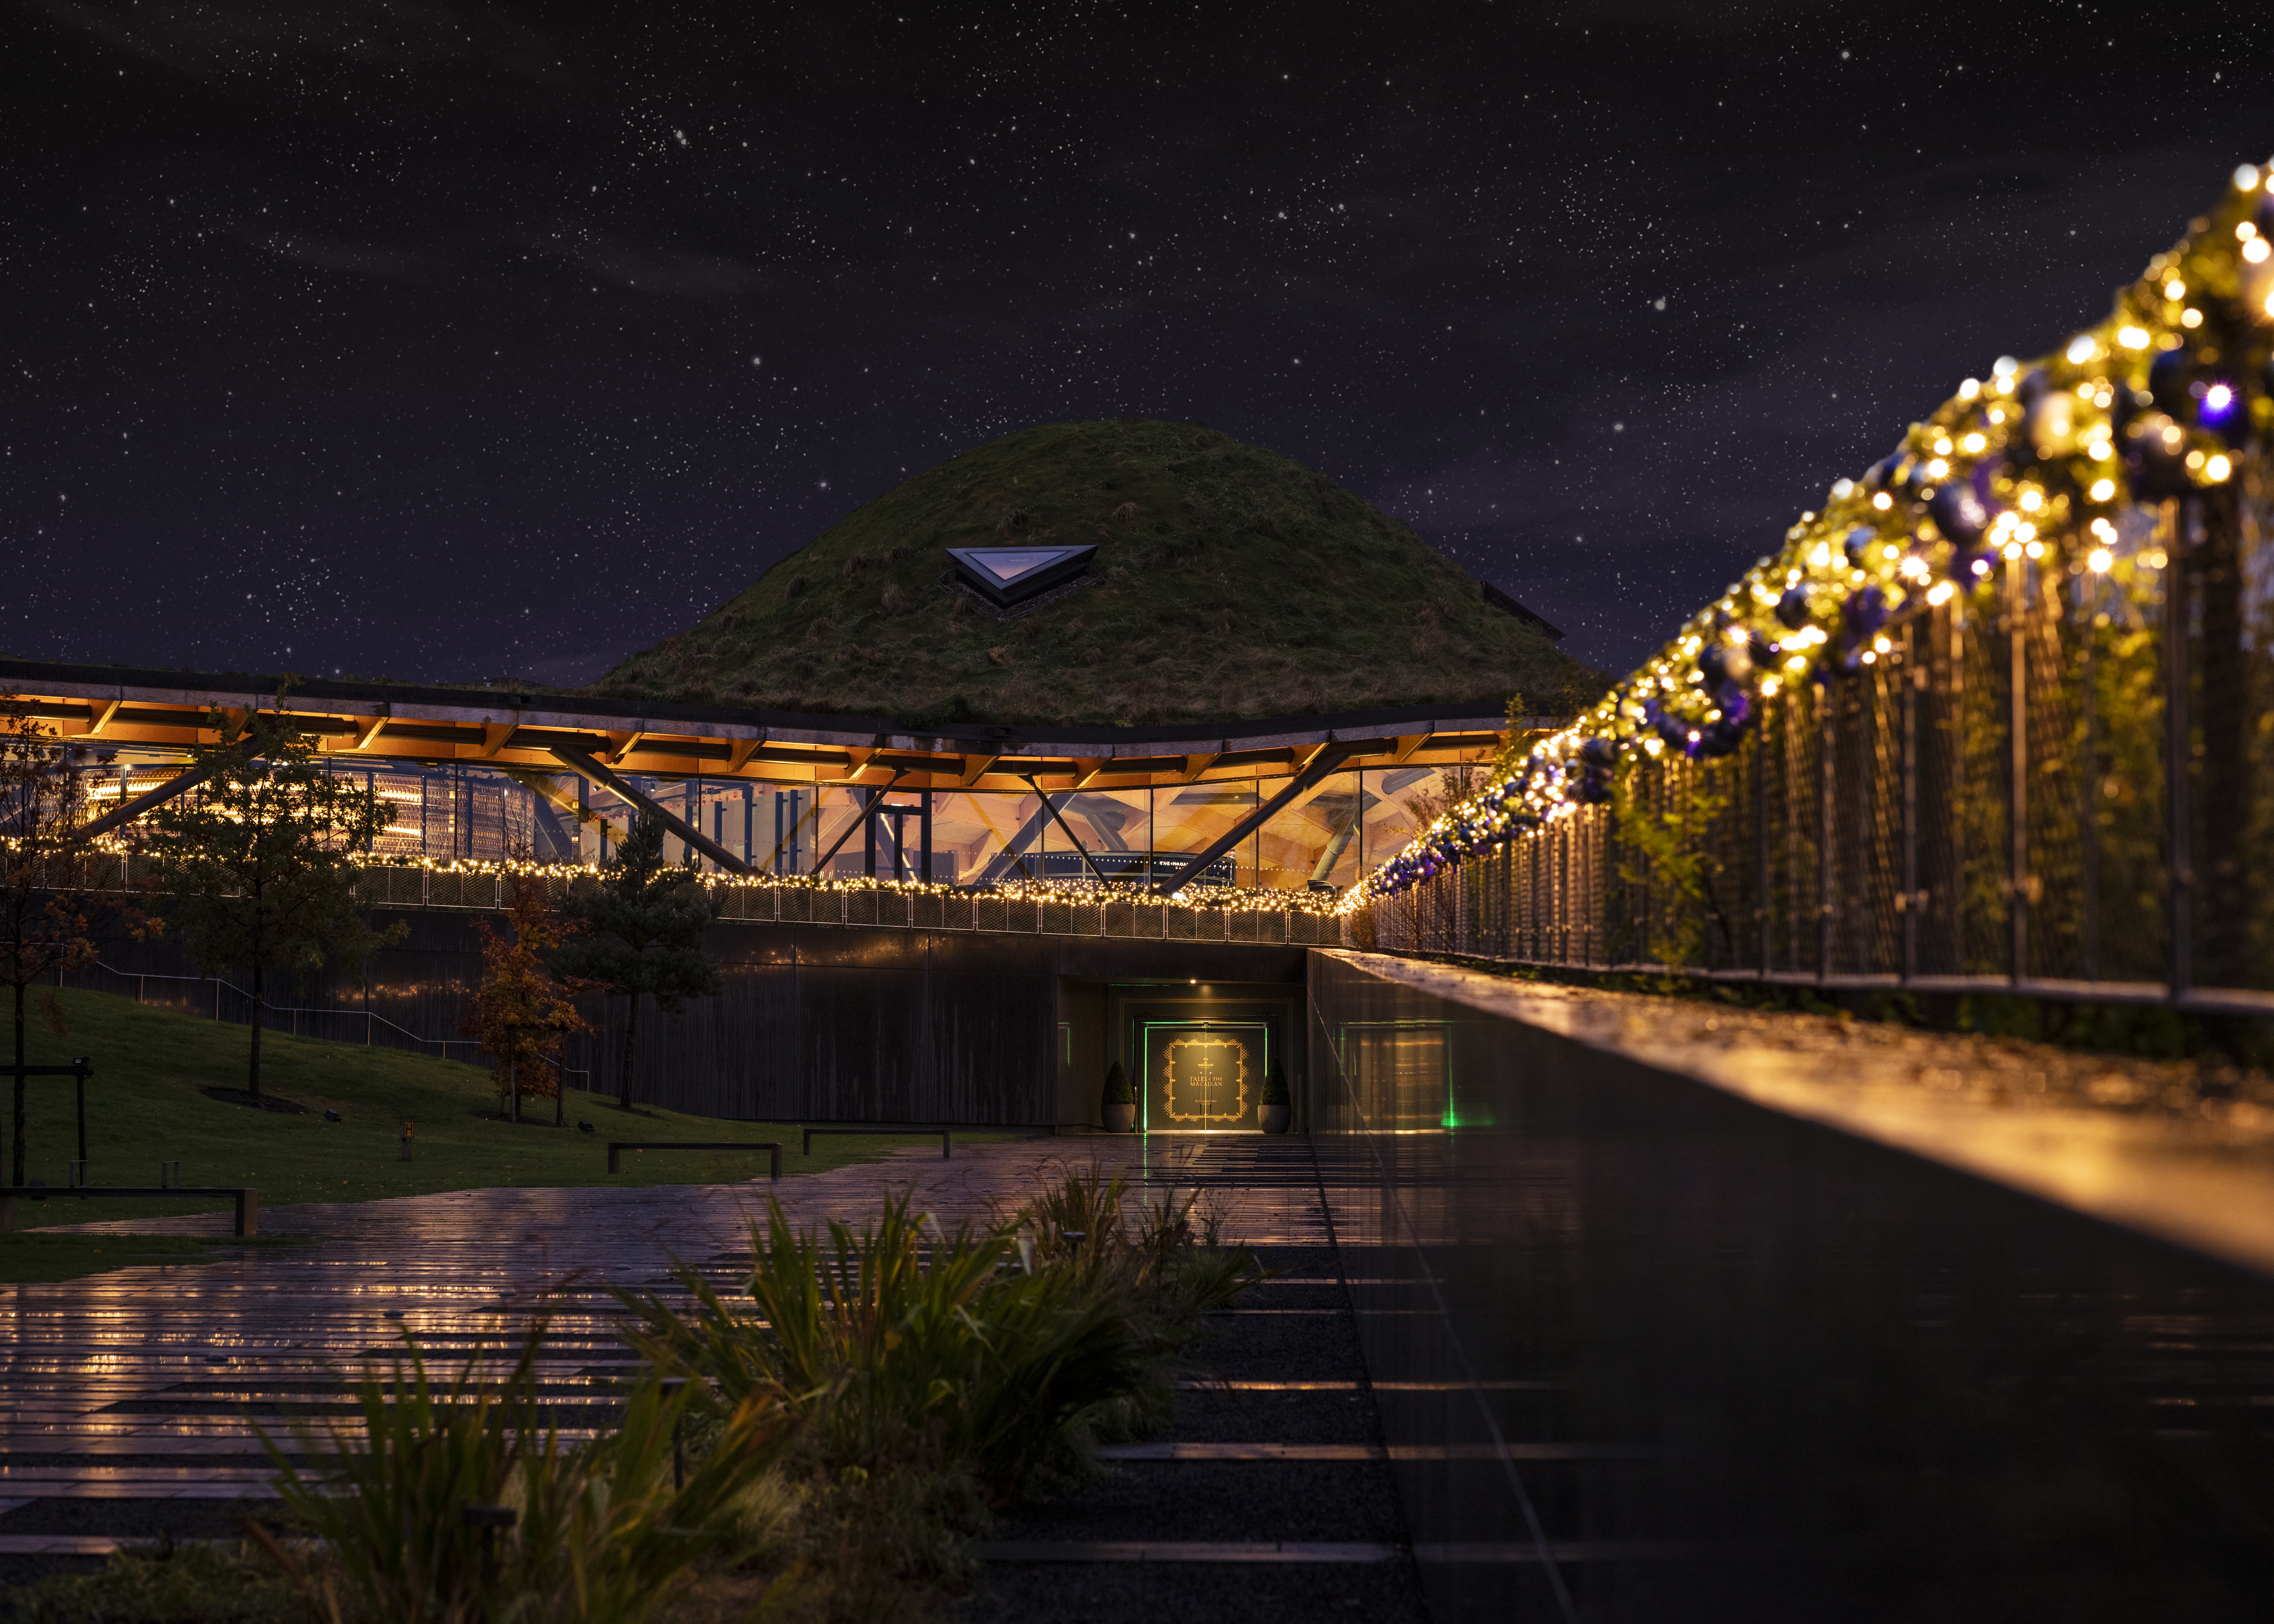 A Night on Earth, The Macallan Estate Experience provides a unique opportunity to experience The Macallan in all its seasonal splendour